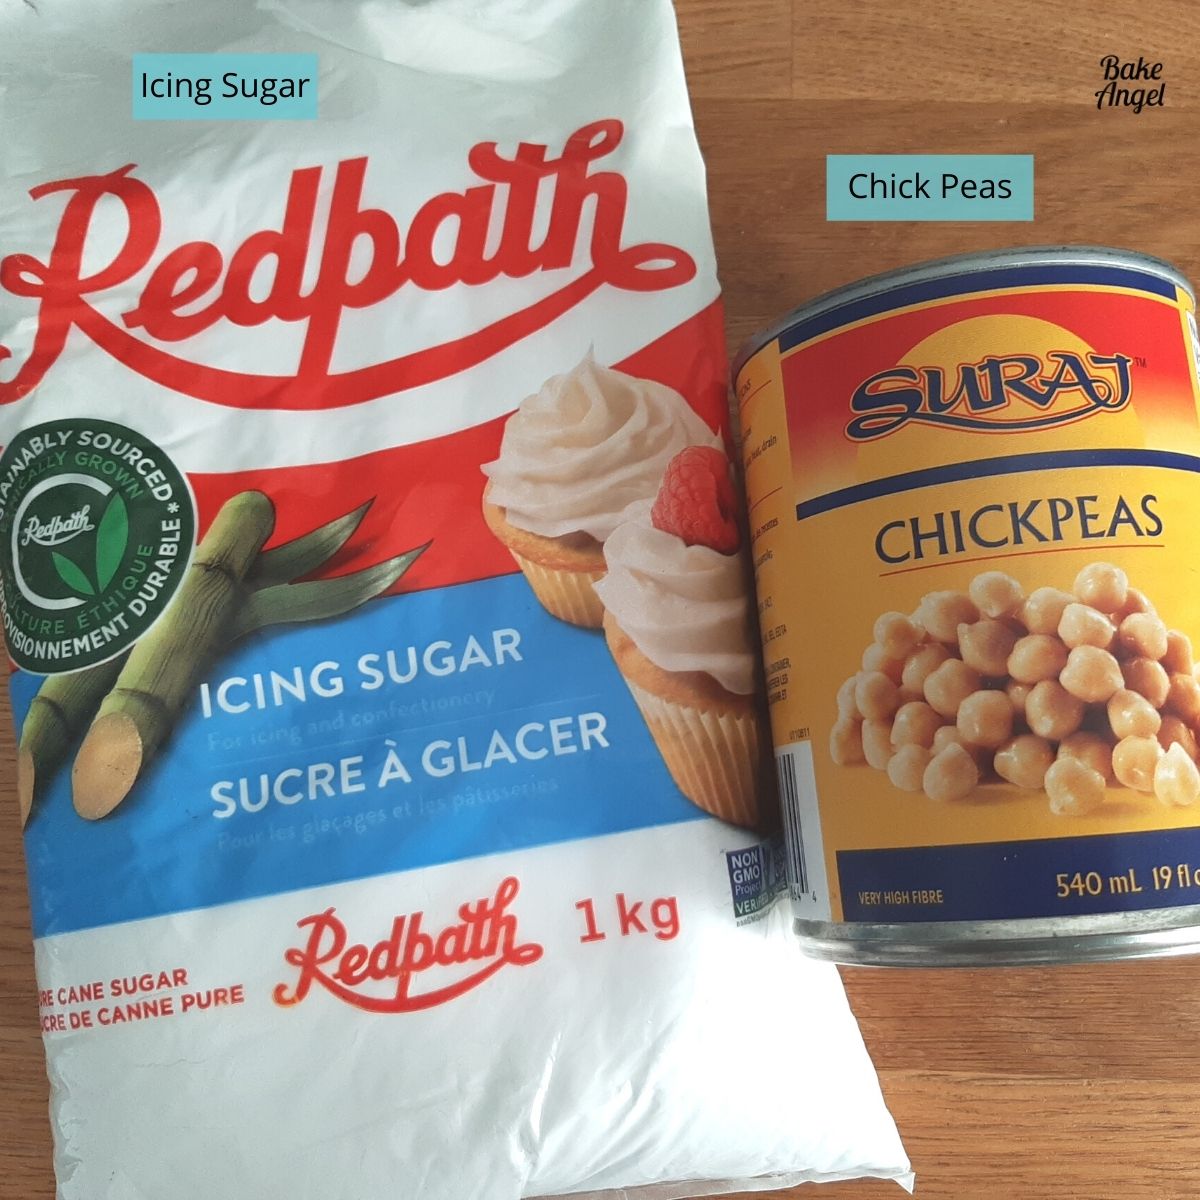 Showing Ingredients needed to make vegan royal icing. A can of chick peas and a bag of icing sugar.